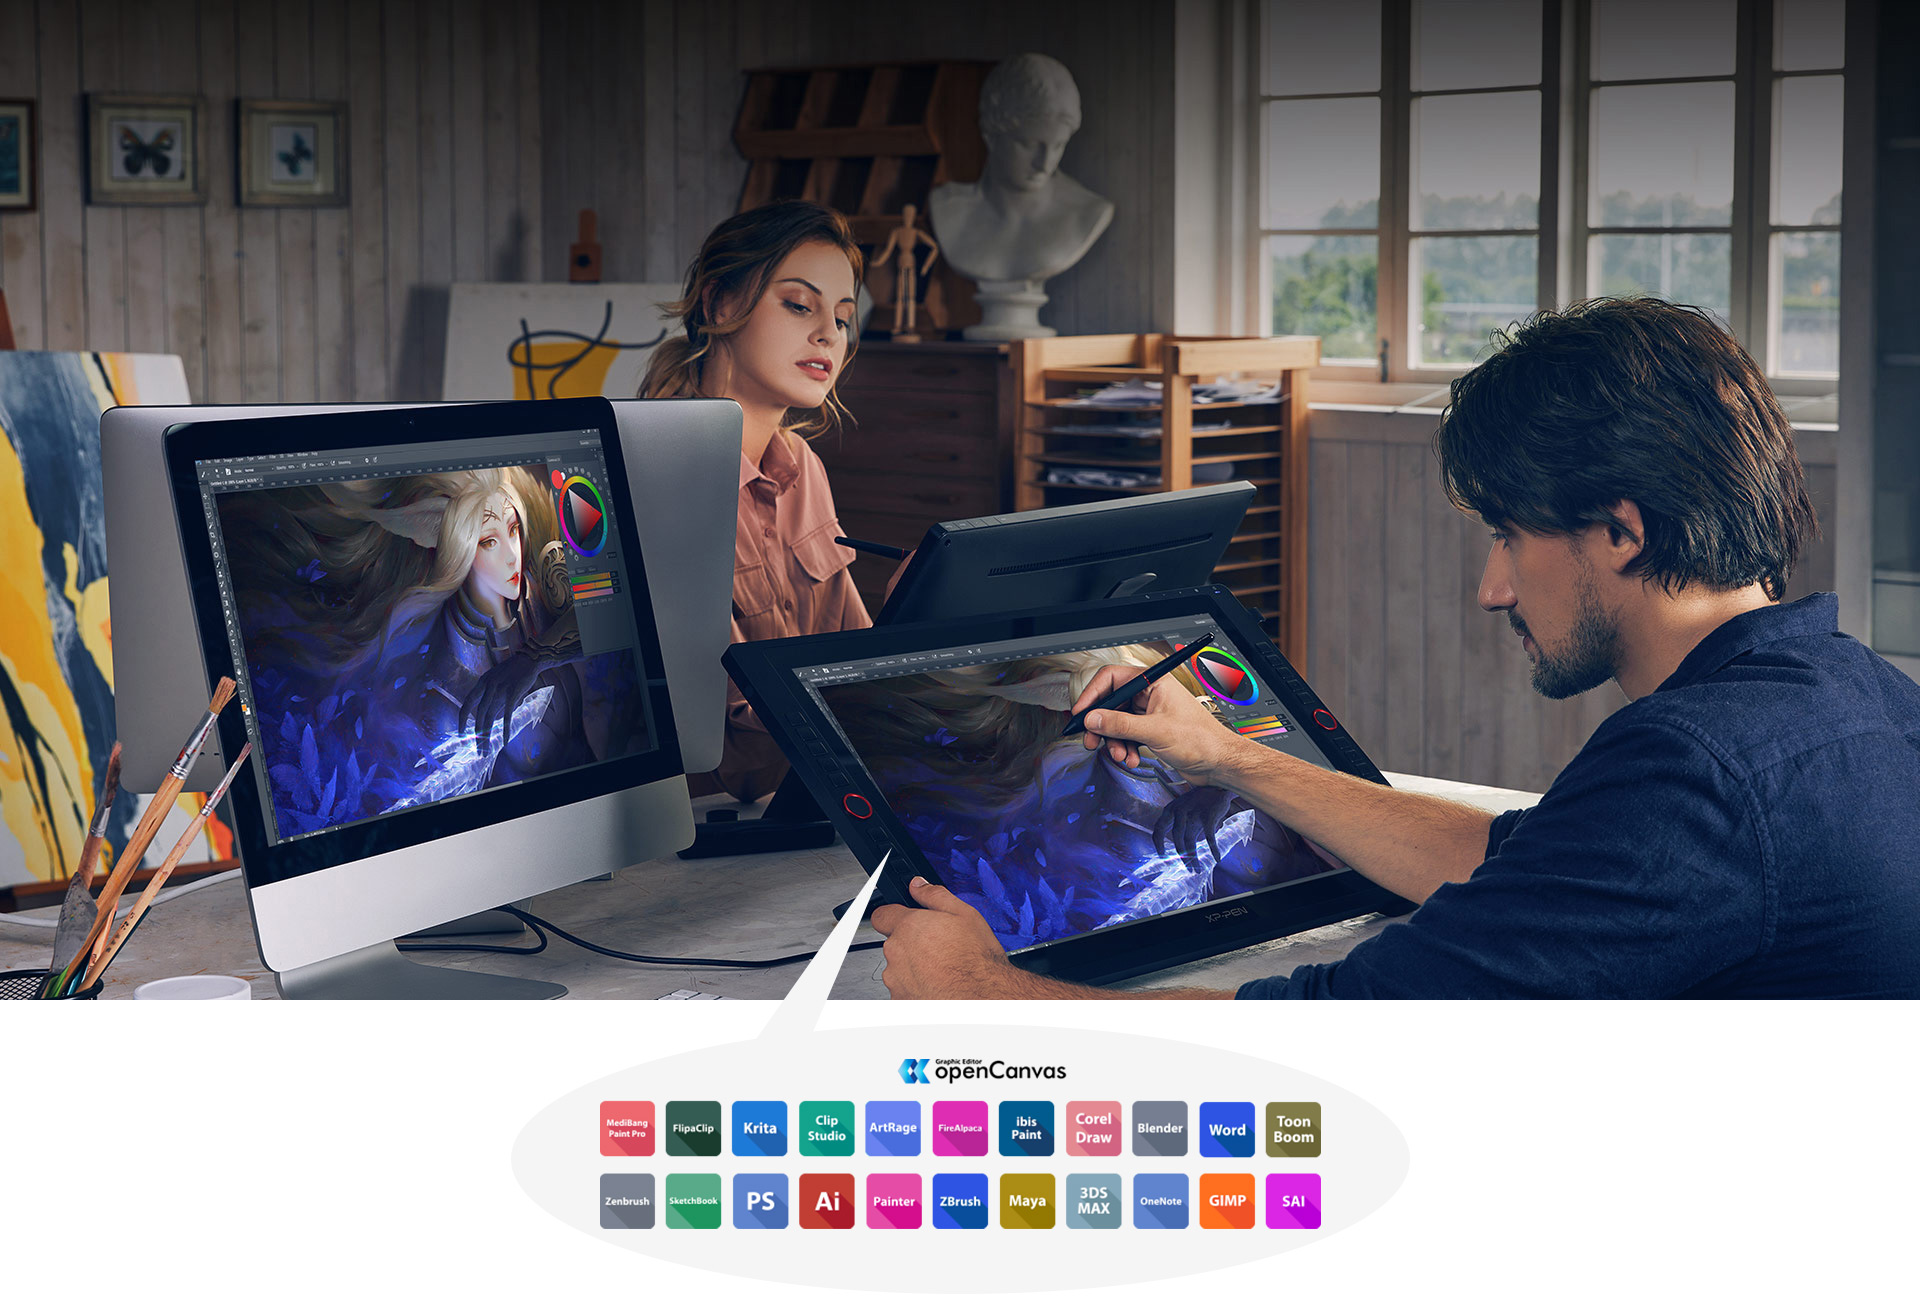 XP-Pen Artist 24 Pro features two easy-to-control red dial wheels and 20 customizable shortcut keys